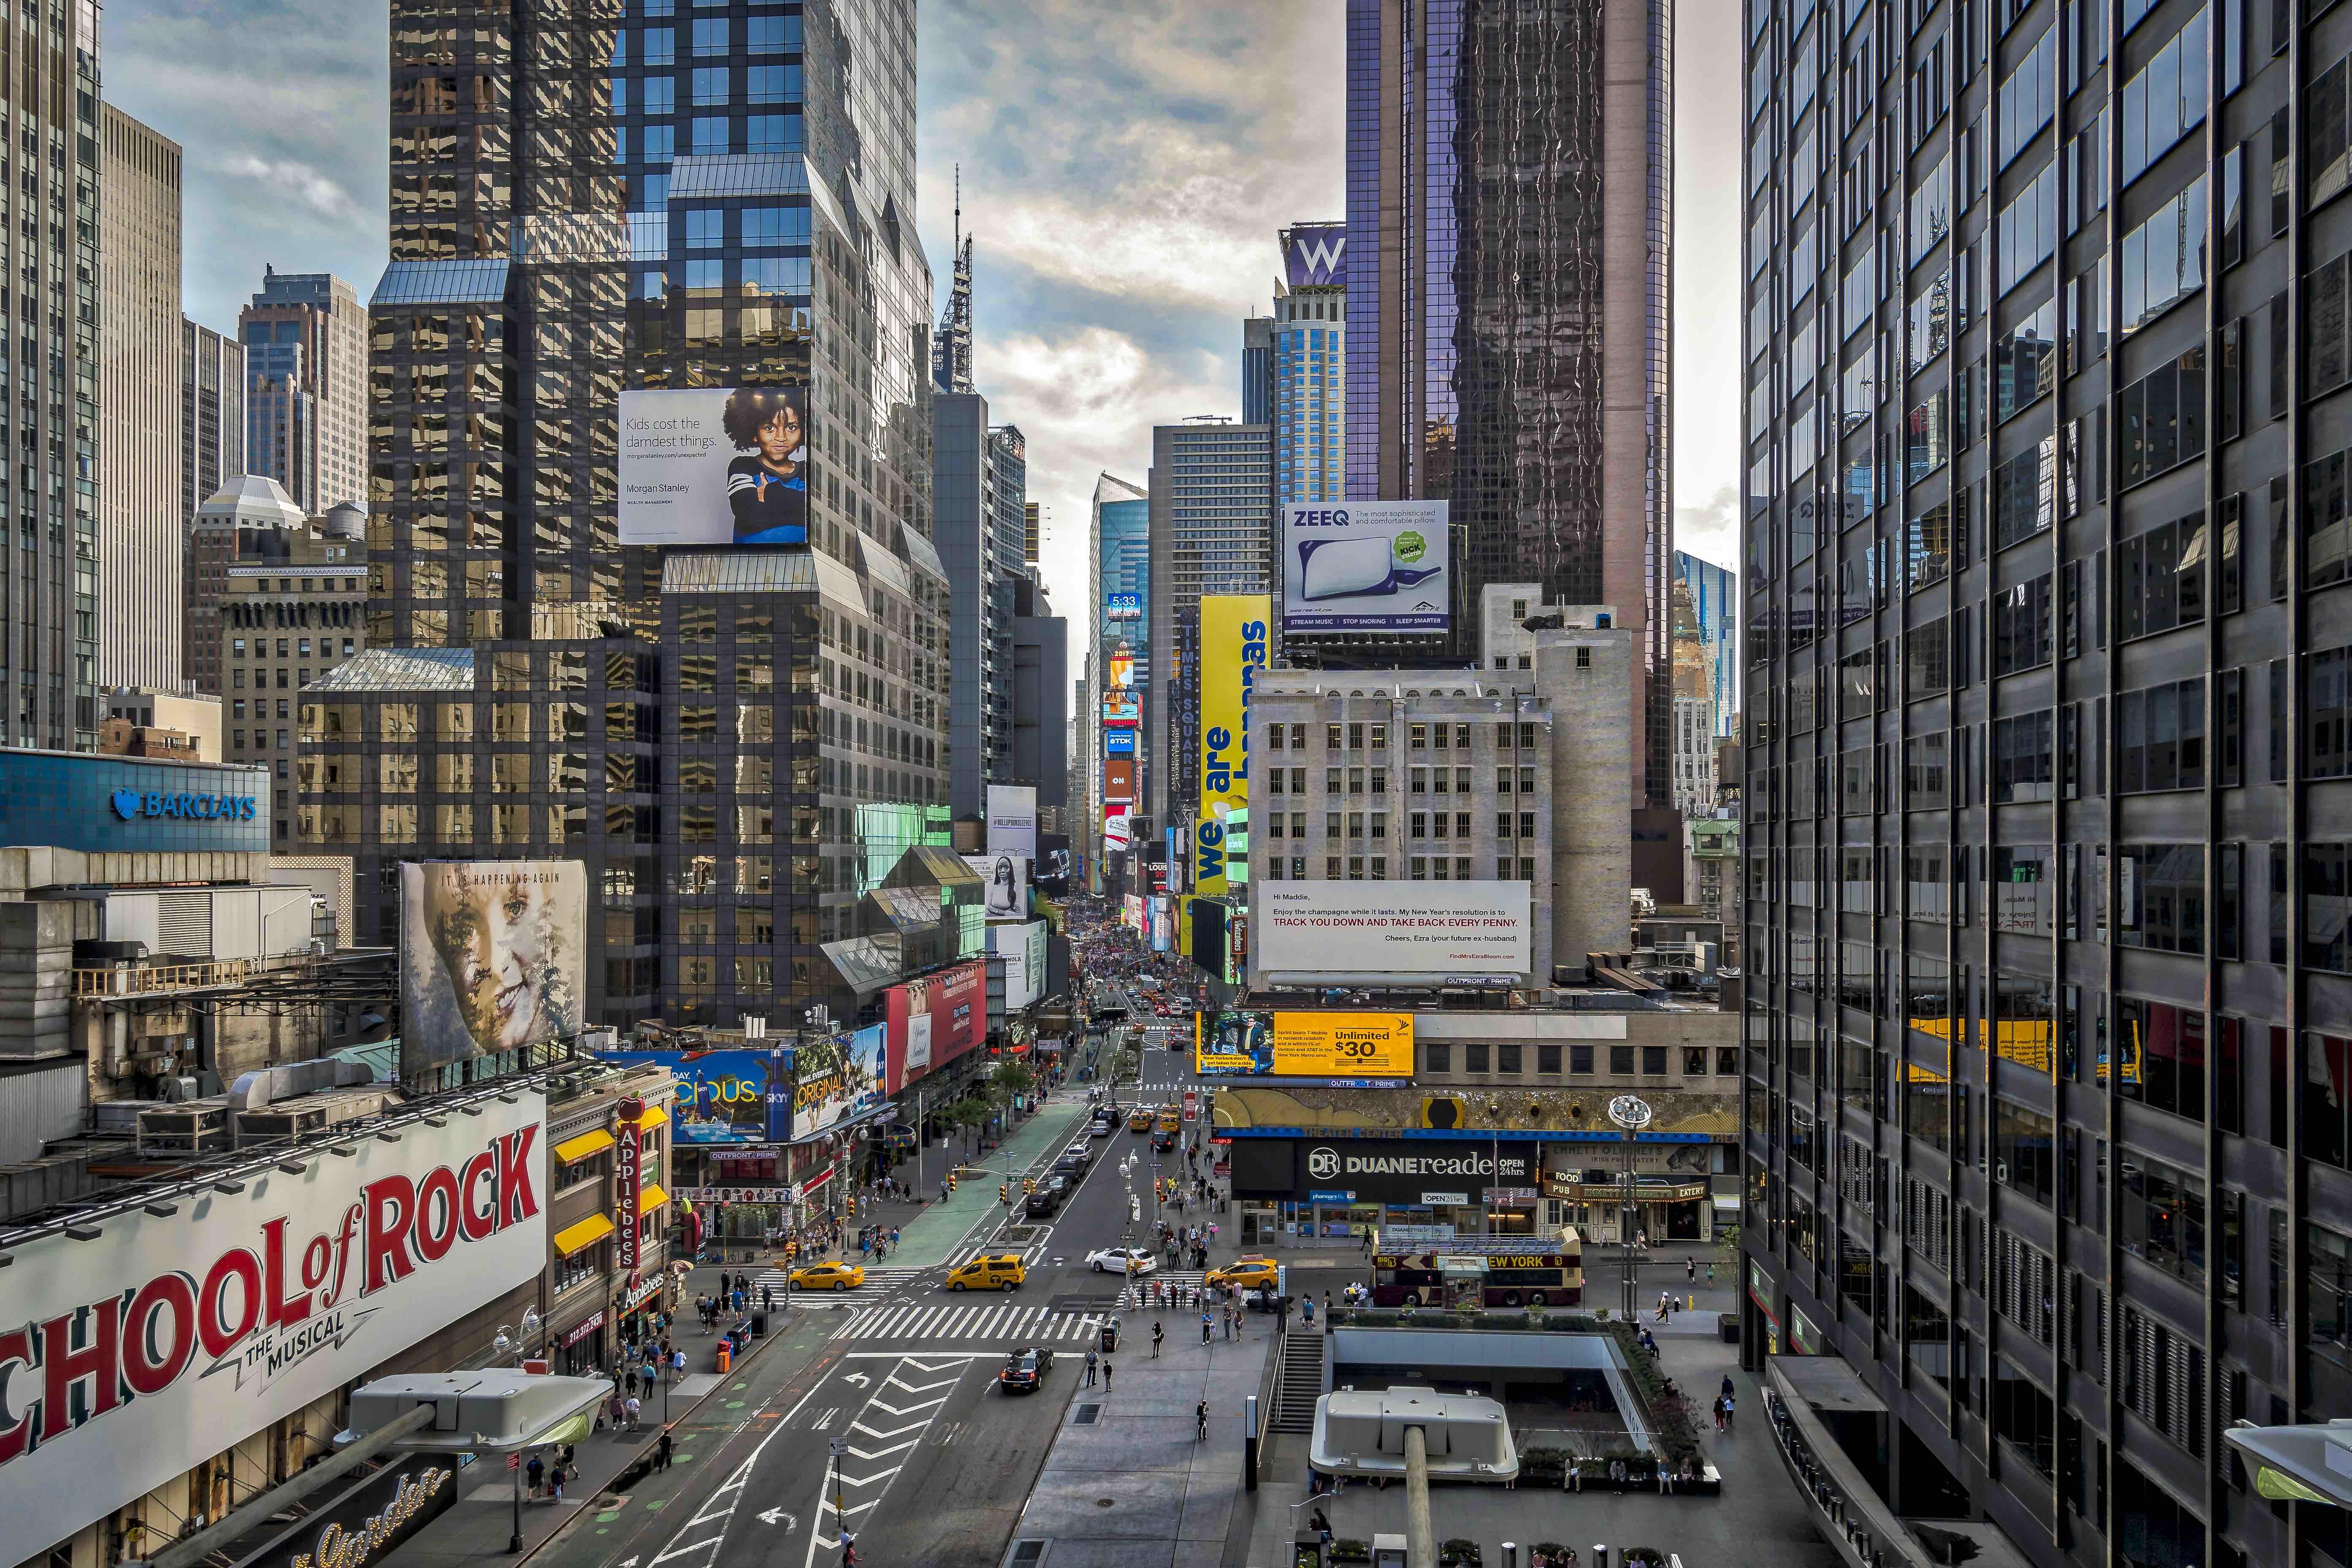 Wallpapers Times Square in new York is located at the intersection of Broadway and Seventh Avenue street on the desktop